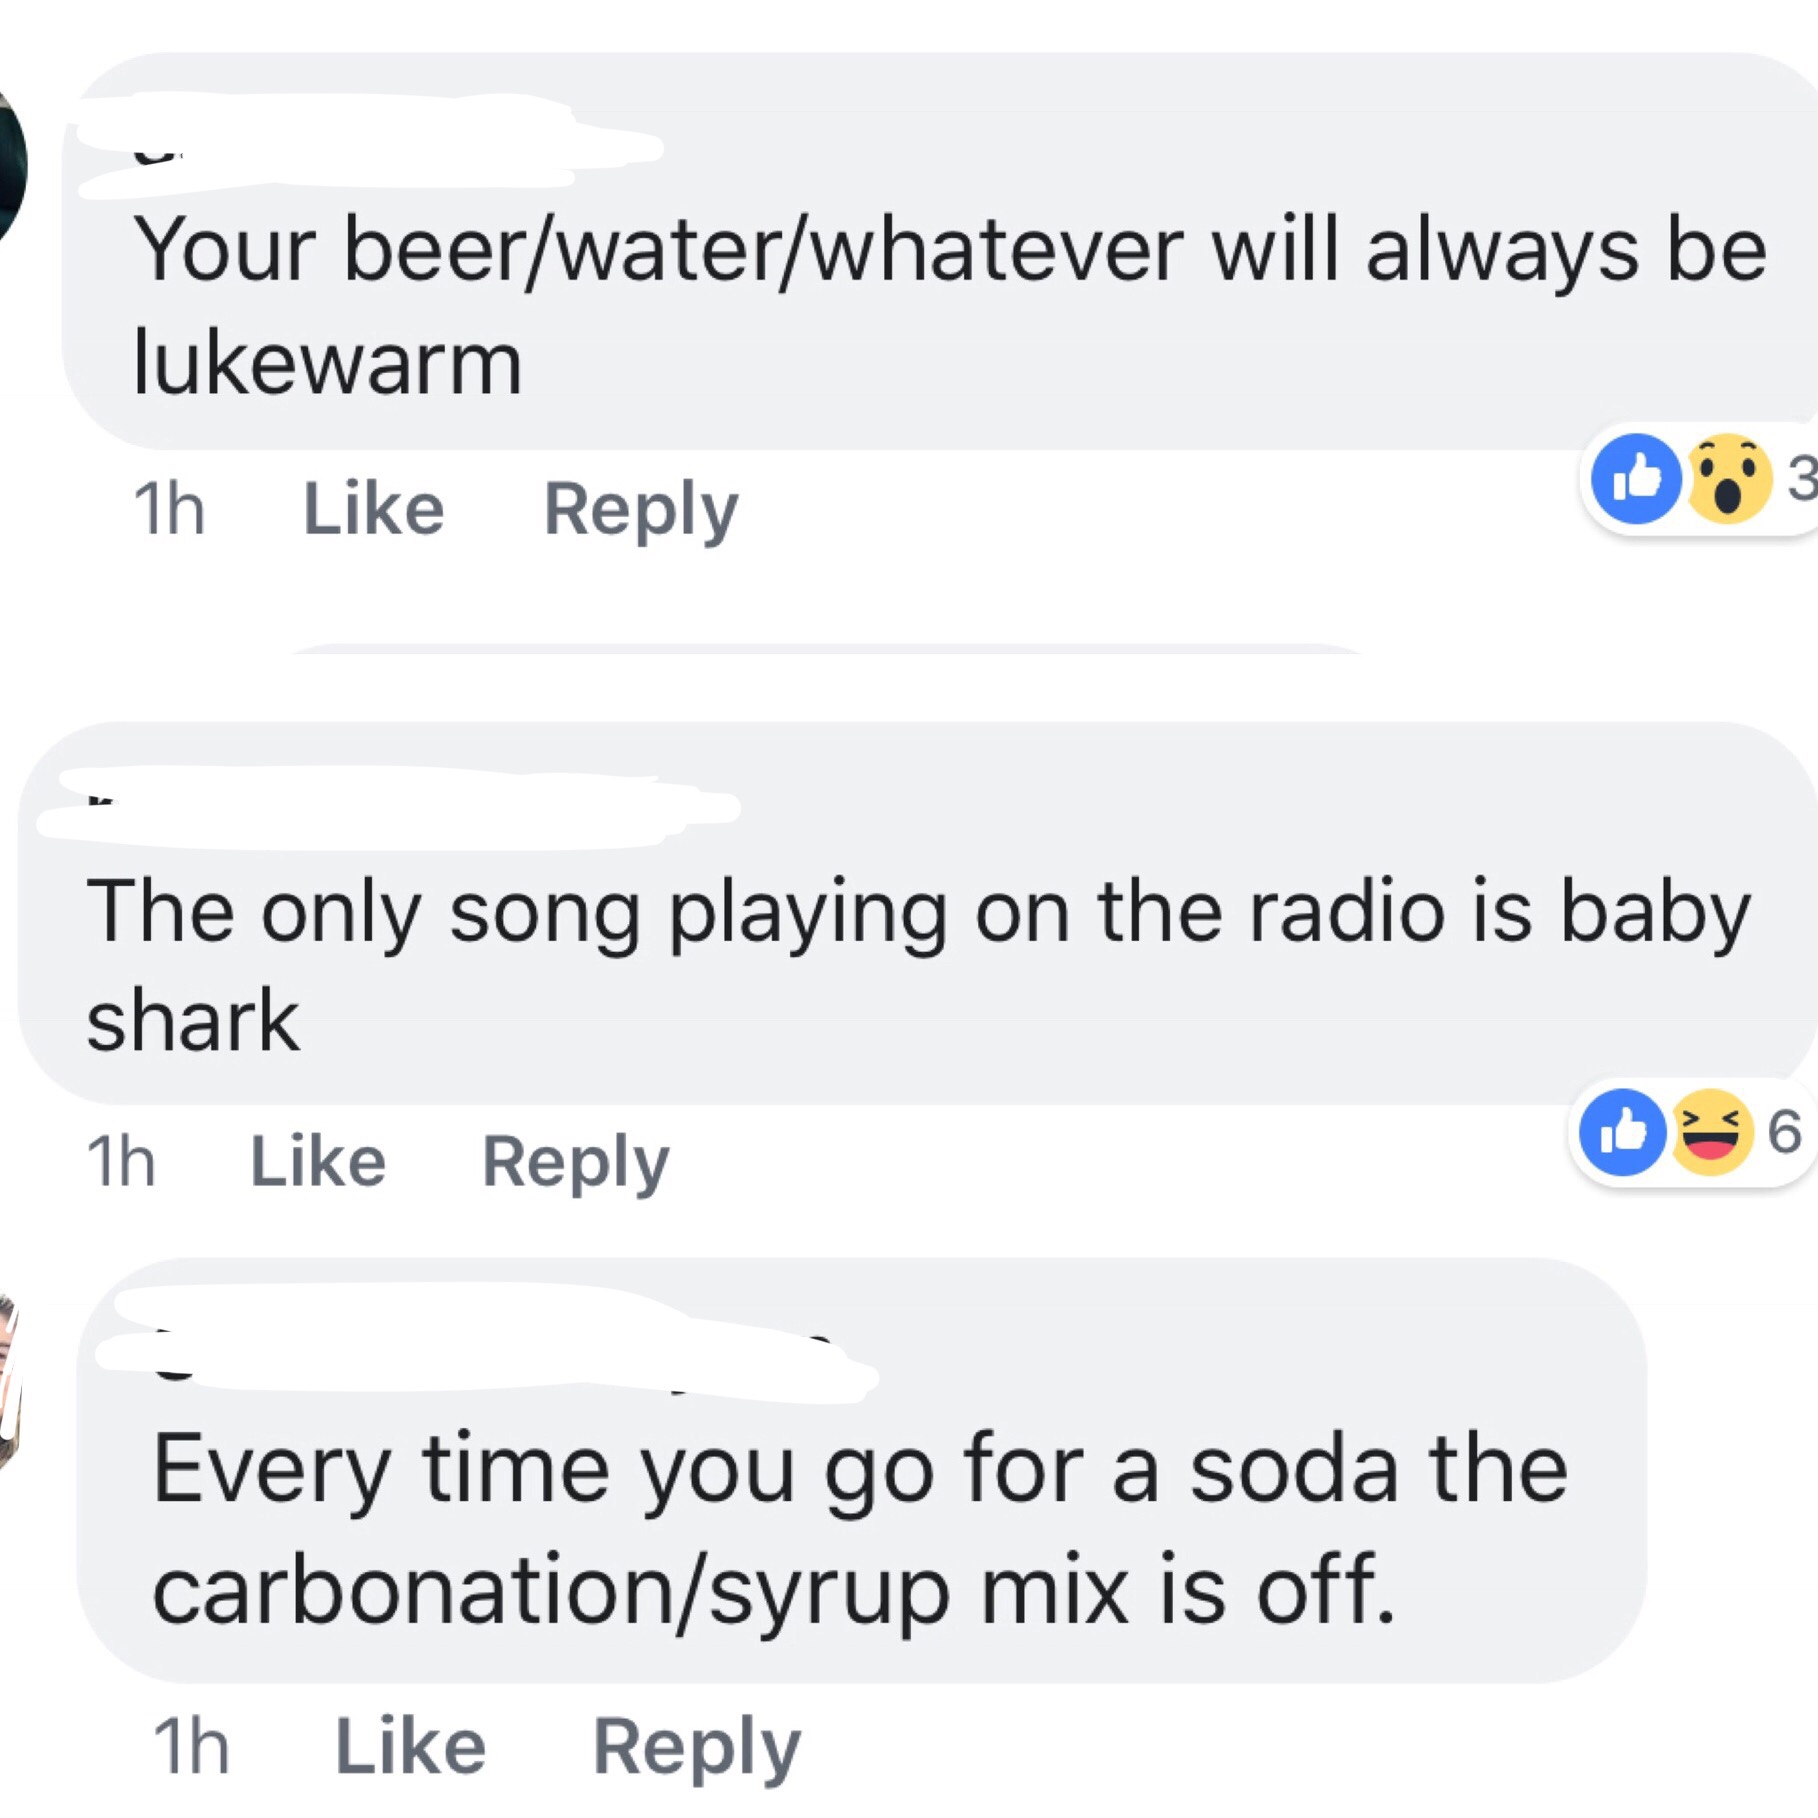 angle - Your beerwaterwhatever will always be lukewarm 1h The only song playing on the radio is baby shark Id 36 1h Every time you go for a soda the carbonationsyrup mix is off. 1h